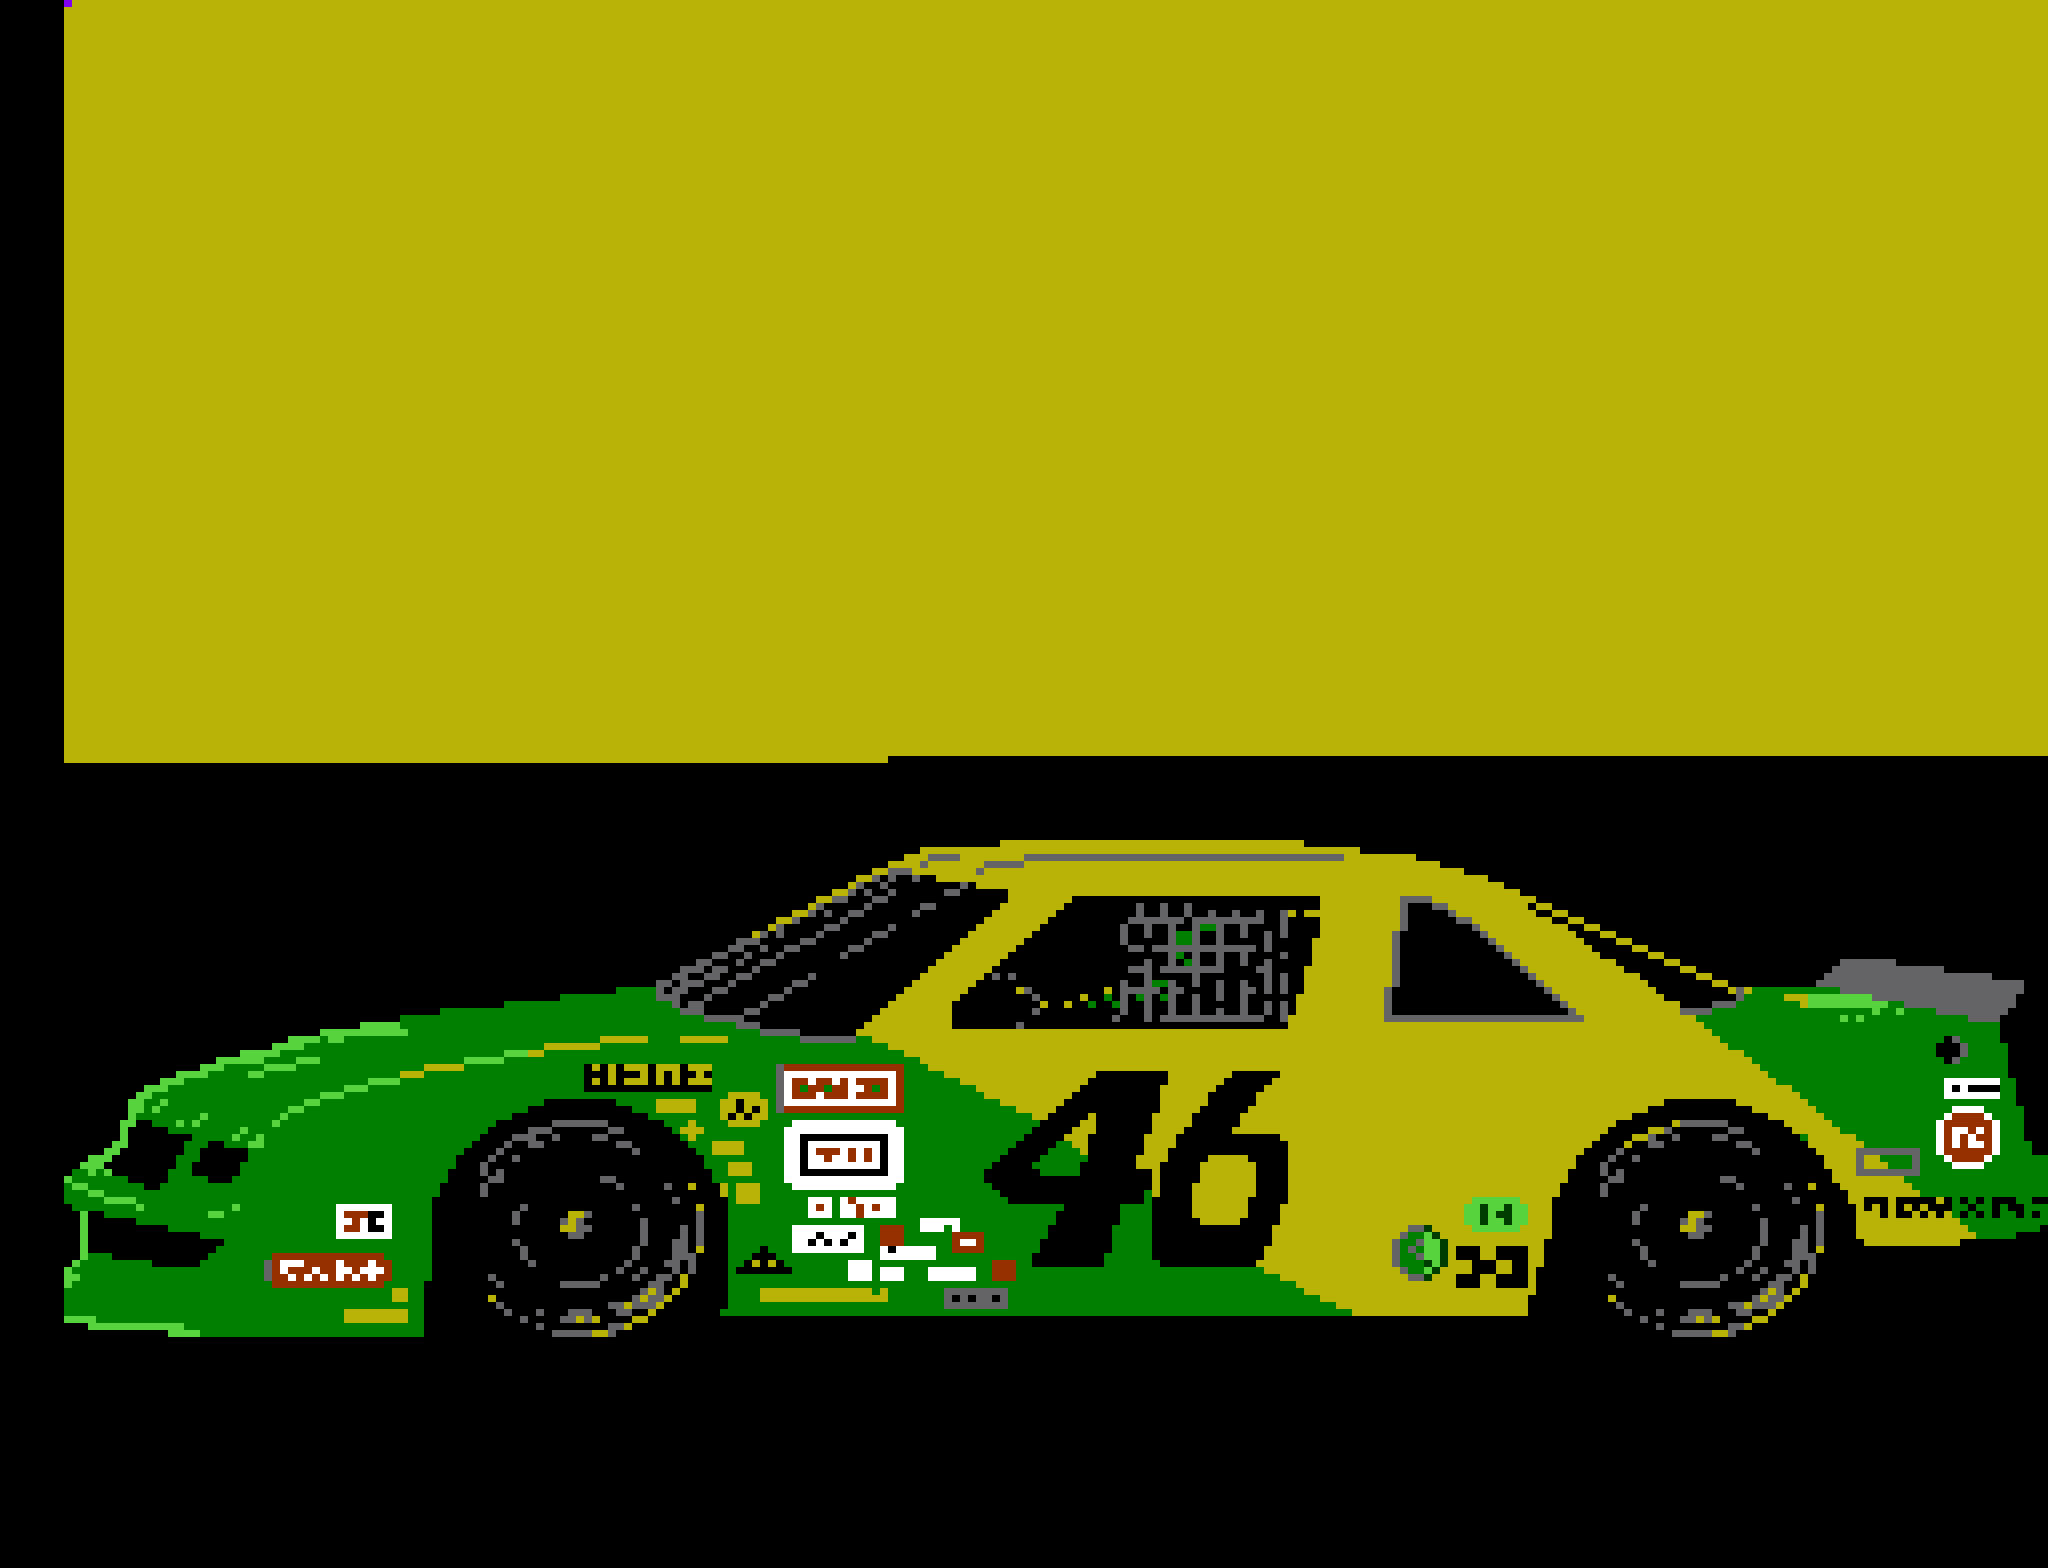 Long-lost version of NES game Days of Thunder recreated from 30-year-old floppies